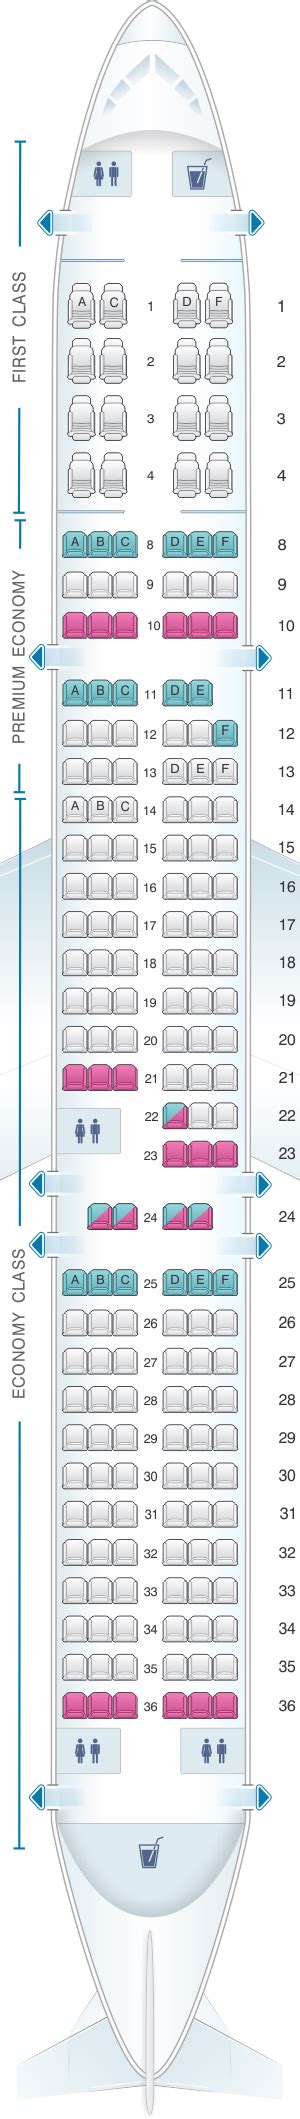 Seat Map American Airlines Airbus A321 181pax